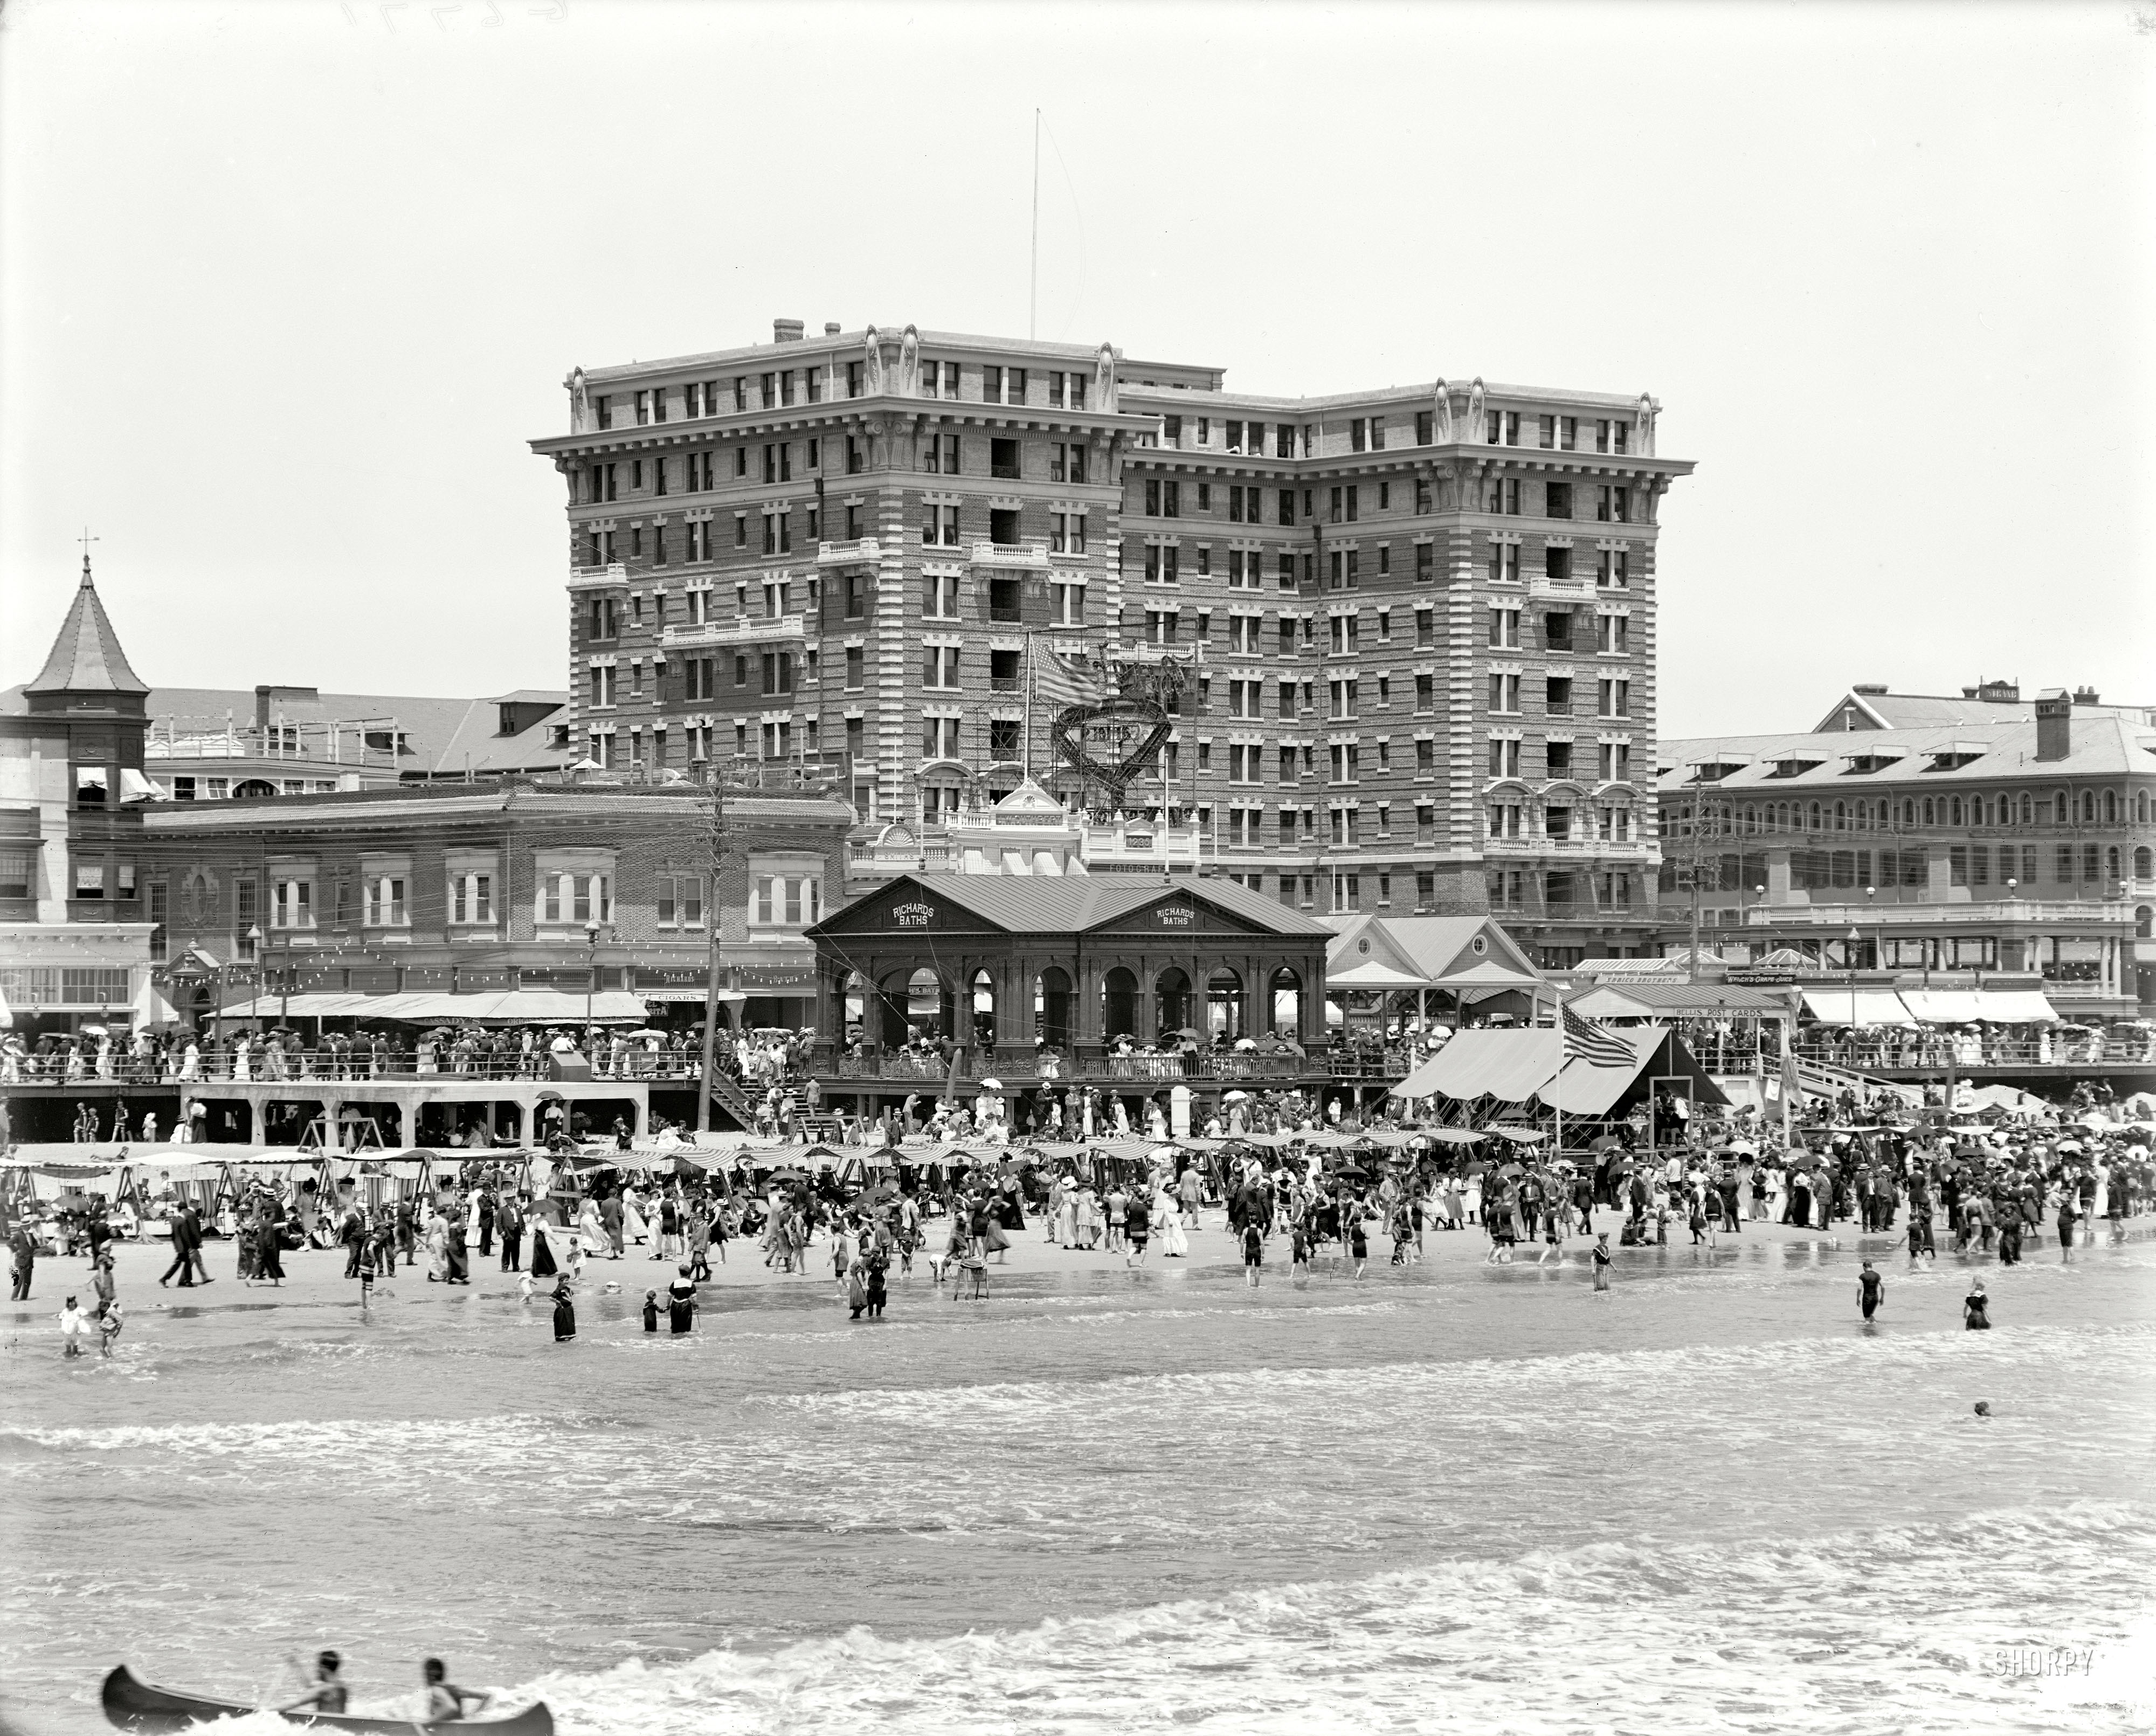 Atlantic City, New Jersey, circa 1913. "Chalfonte Hotel." 8x10 inch dry plate glass negative, Detroit Publishing Company. View full size.